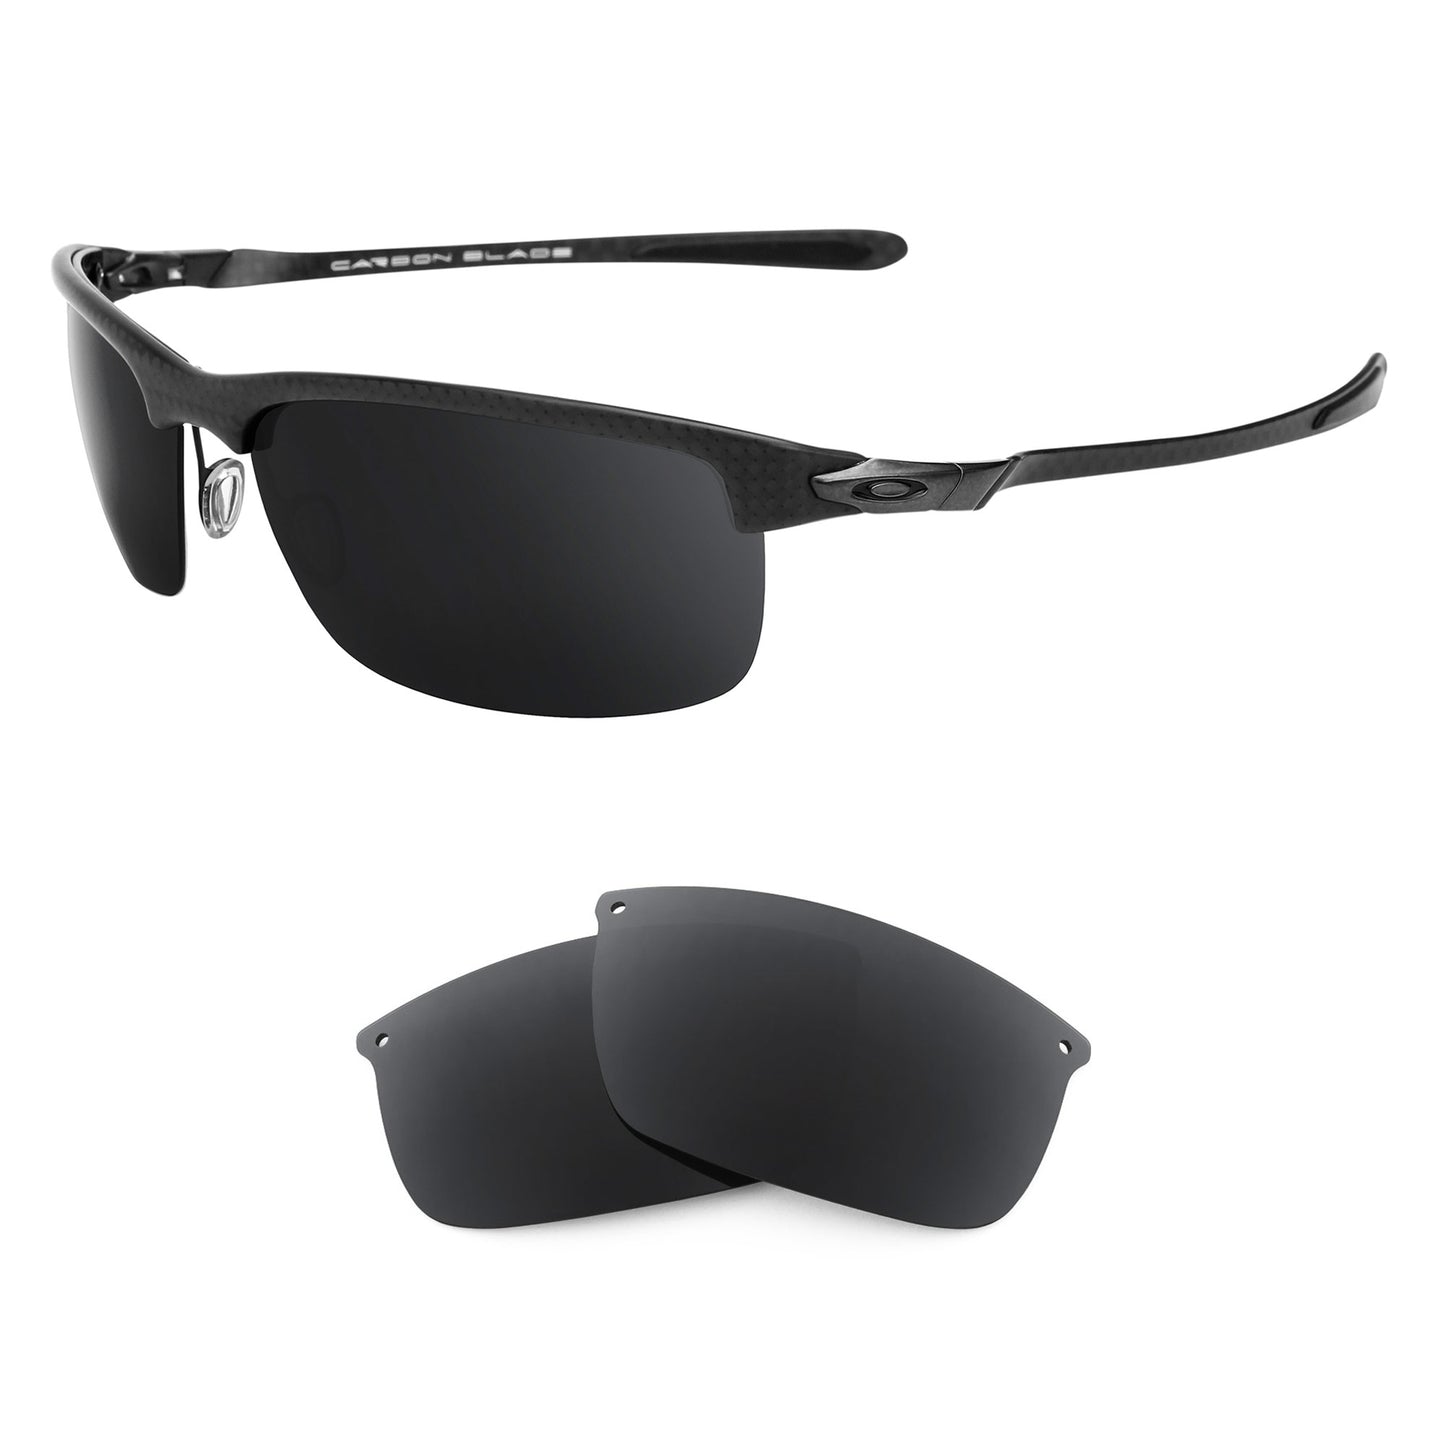 Oakley Carbon Blade sunglasses with replacement lenses